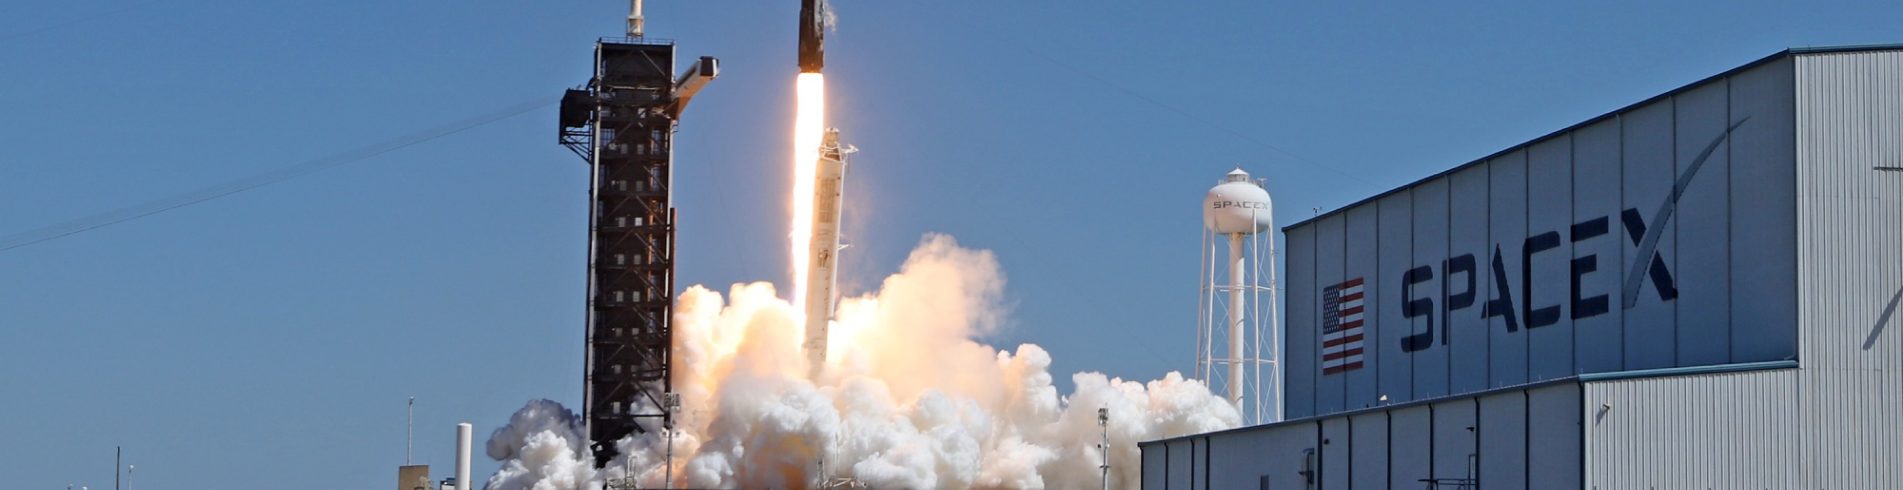 Elon Musk's Spacex Valued At $175 Billion Or More